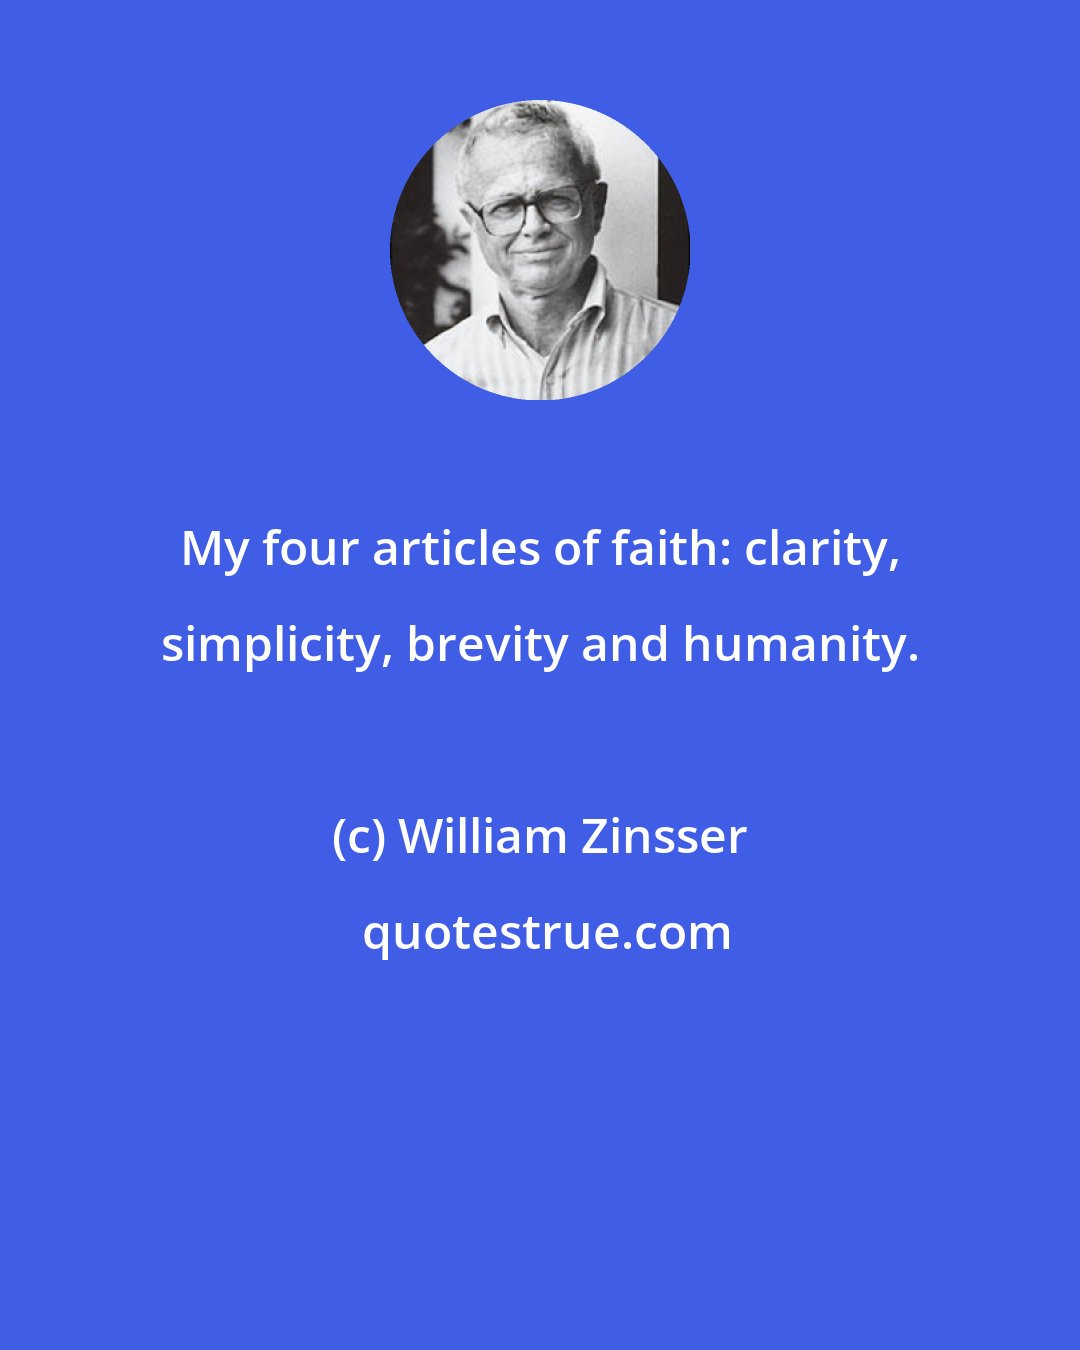 William Zinsser: My four articles of faith: clarity, simplicity, brevity and humanity.